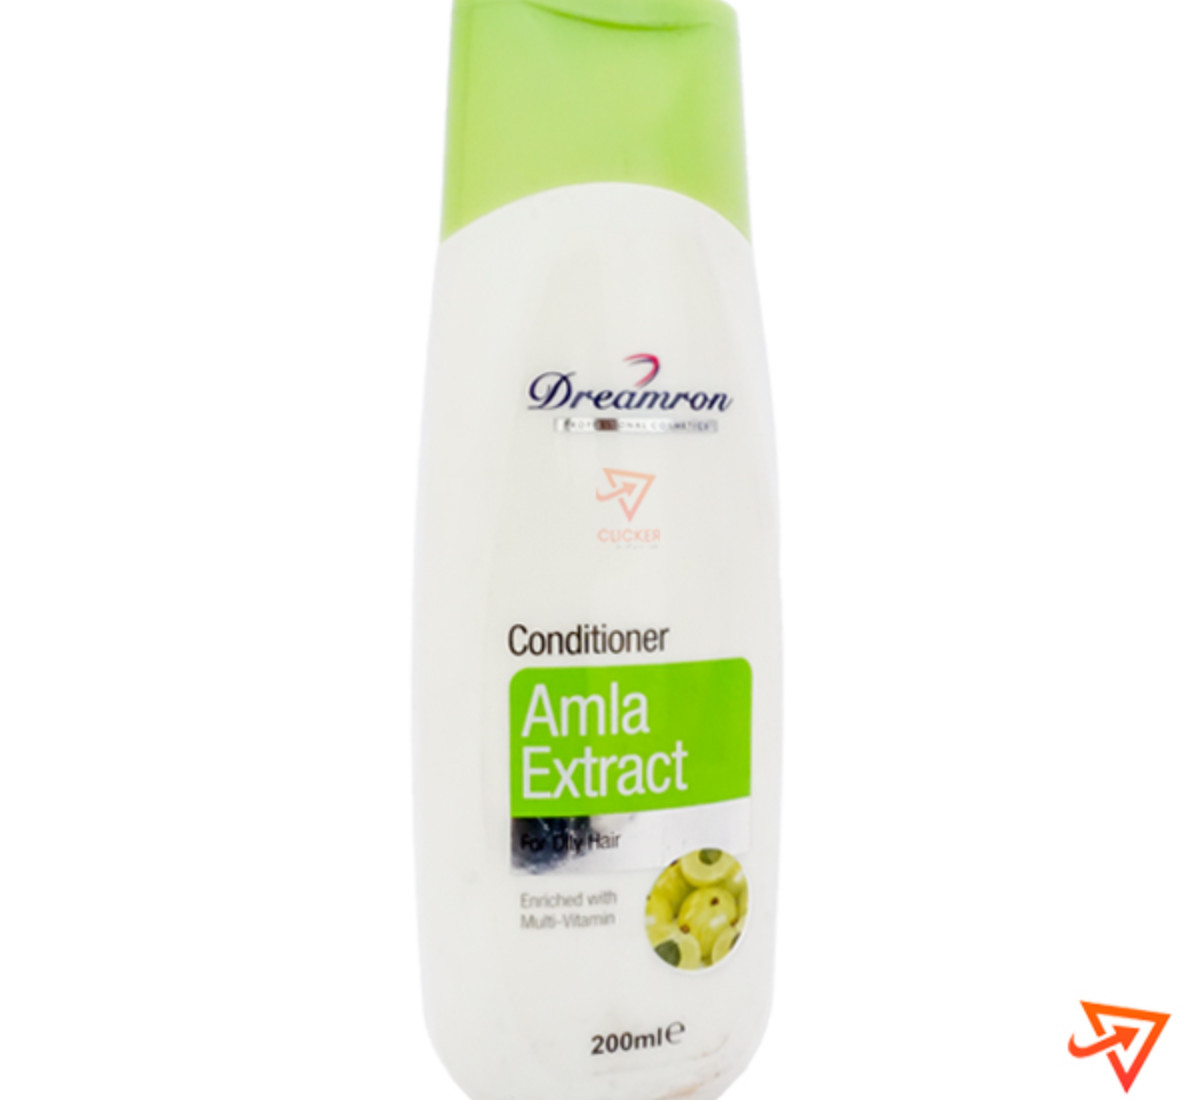 Clicker product 200ml DREAMRON conditioner amla extract for oily hair enriched with multi vitamin 1096